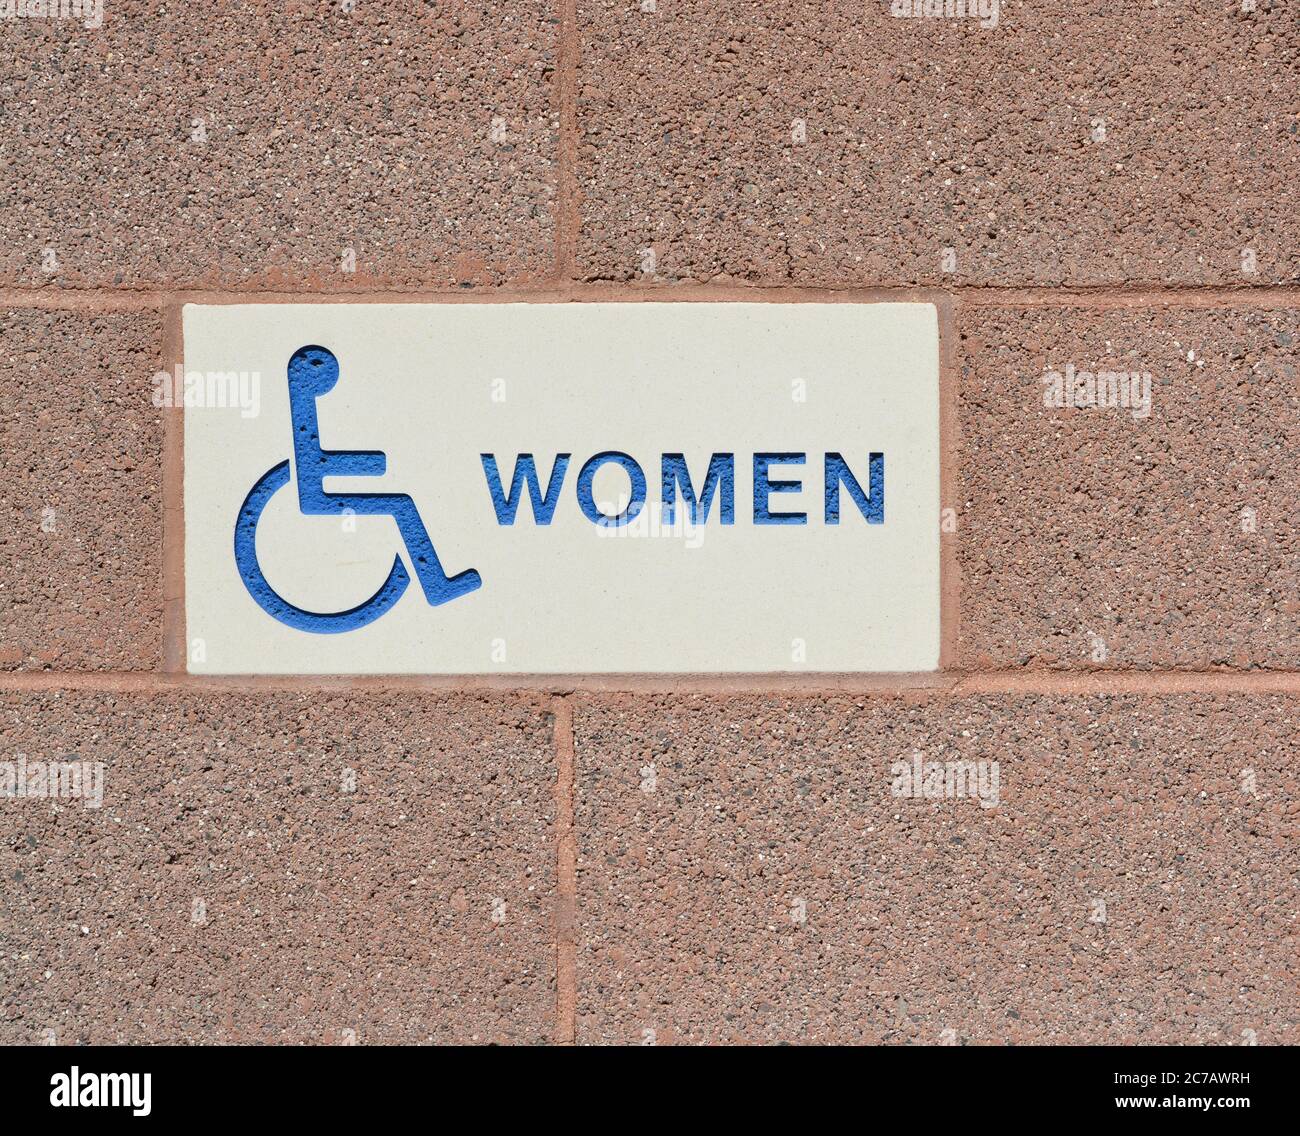 Womens Public Restroom is Handicap Accessible Sign Stock Photo